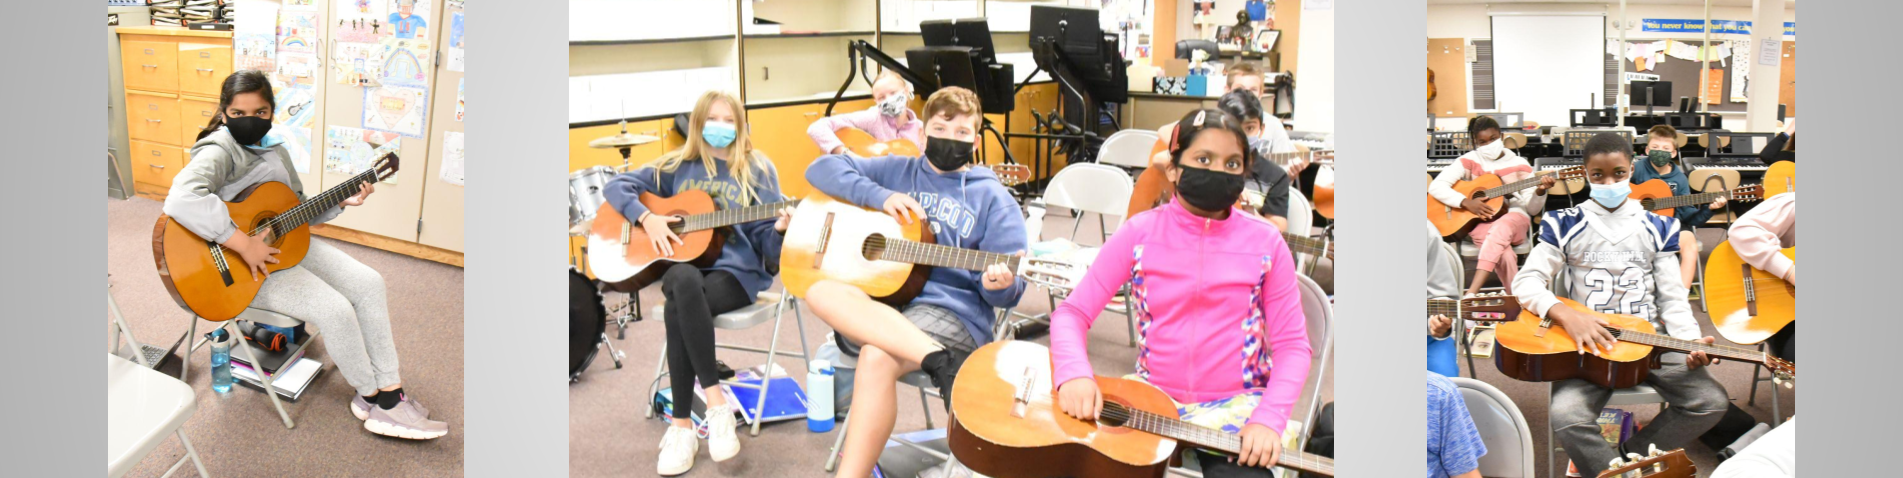 Students learning how to play the guitar